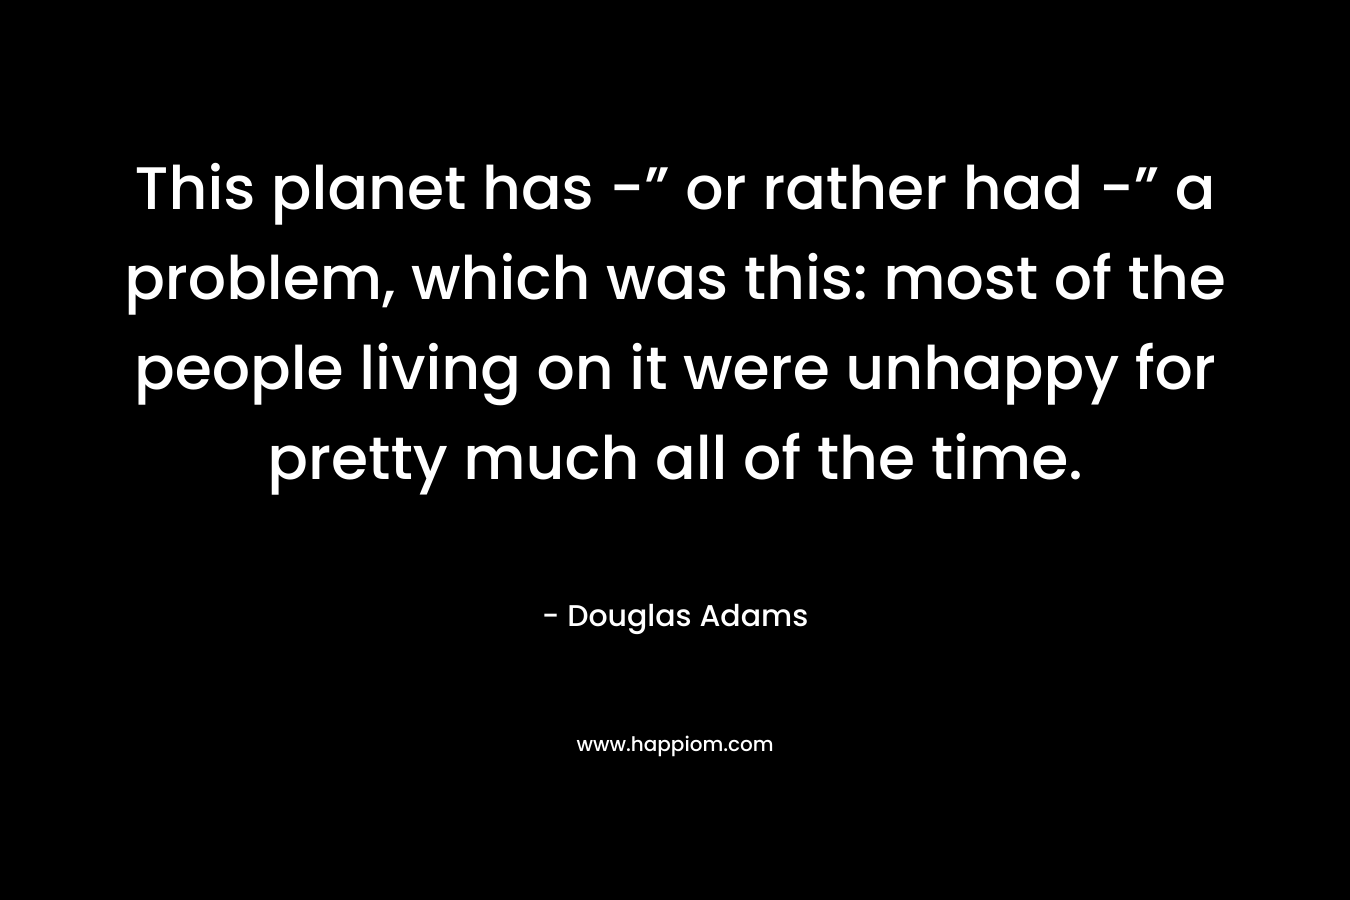 This planet has -” or rather had -” a problem, which was this: most of the people living on it were unhappy for pretty much all of the time.